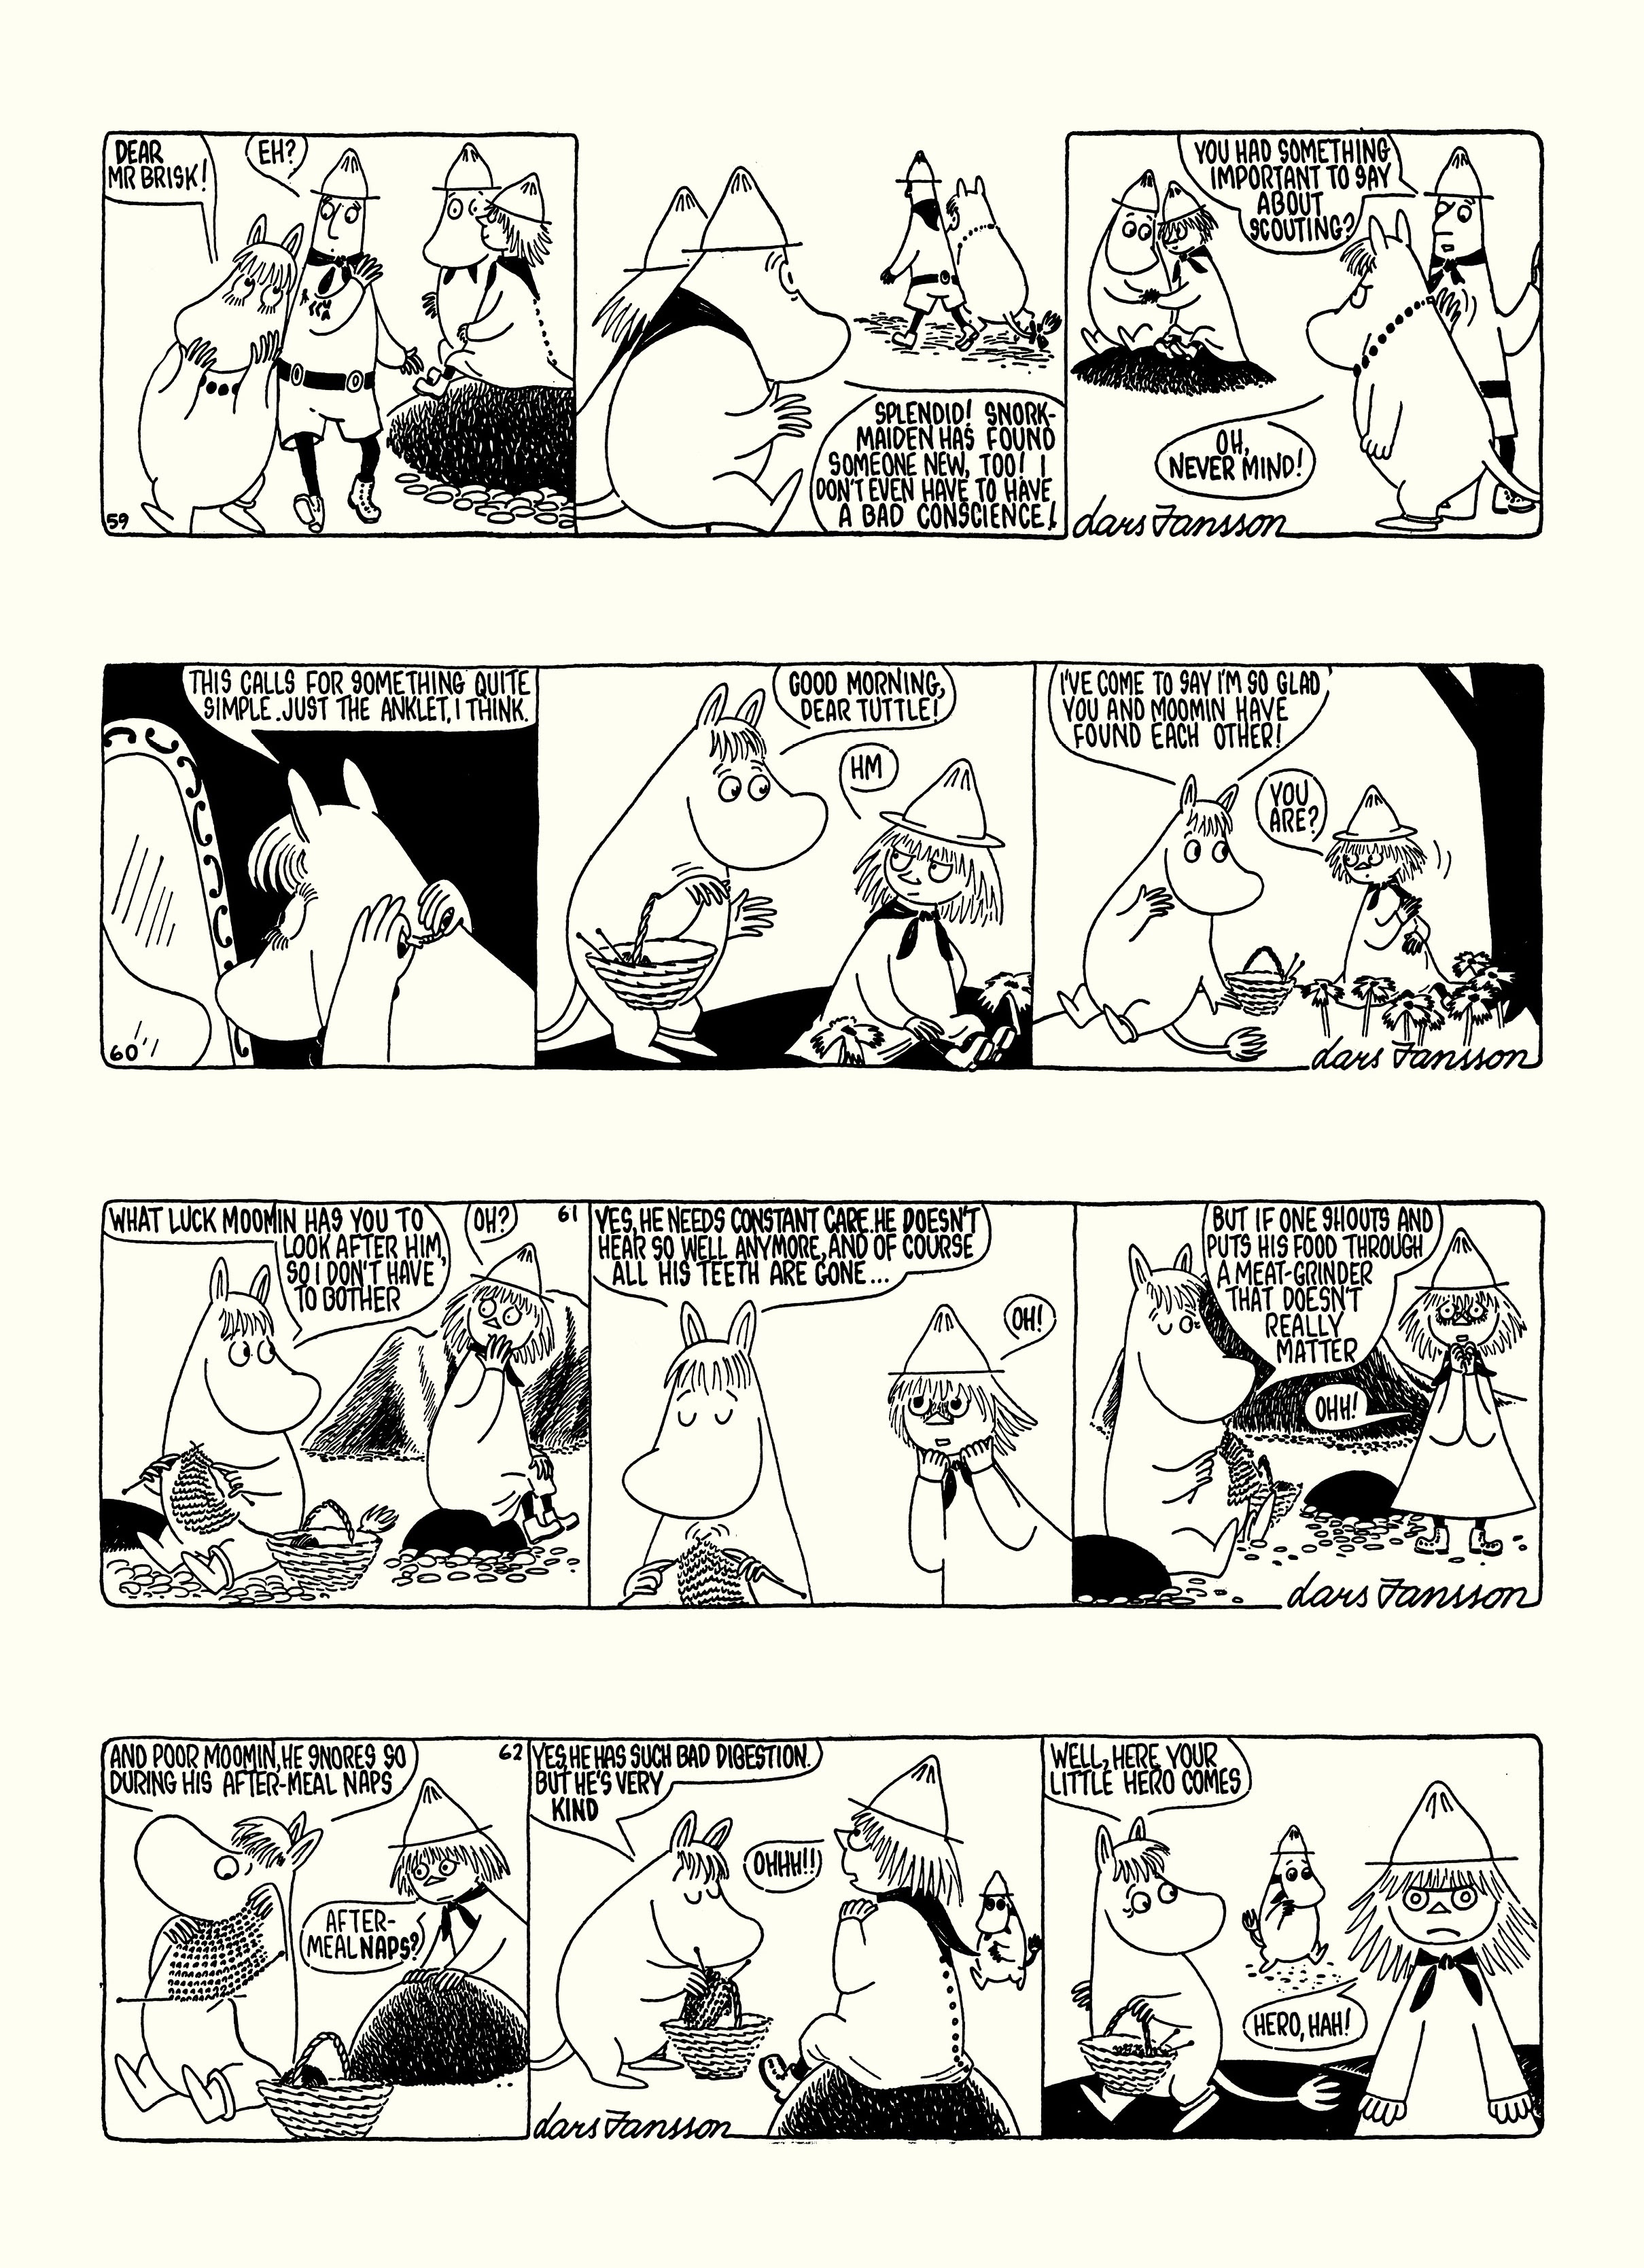 Read online Moomin: The Complete Lars Jansson Comic Strip comic -  Issue # TPB 7 - 42